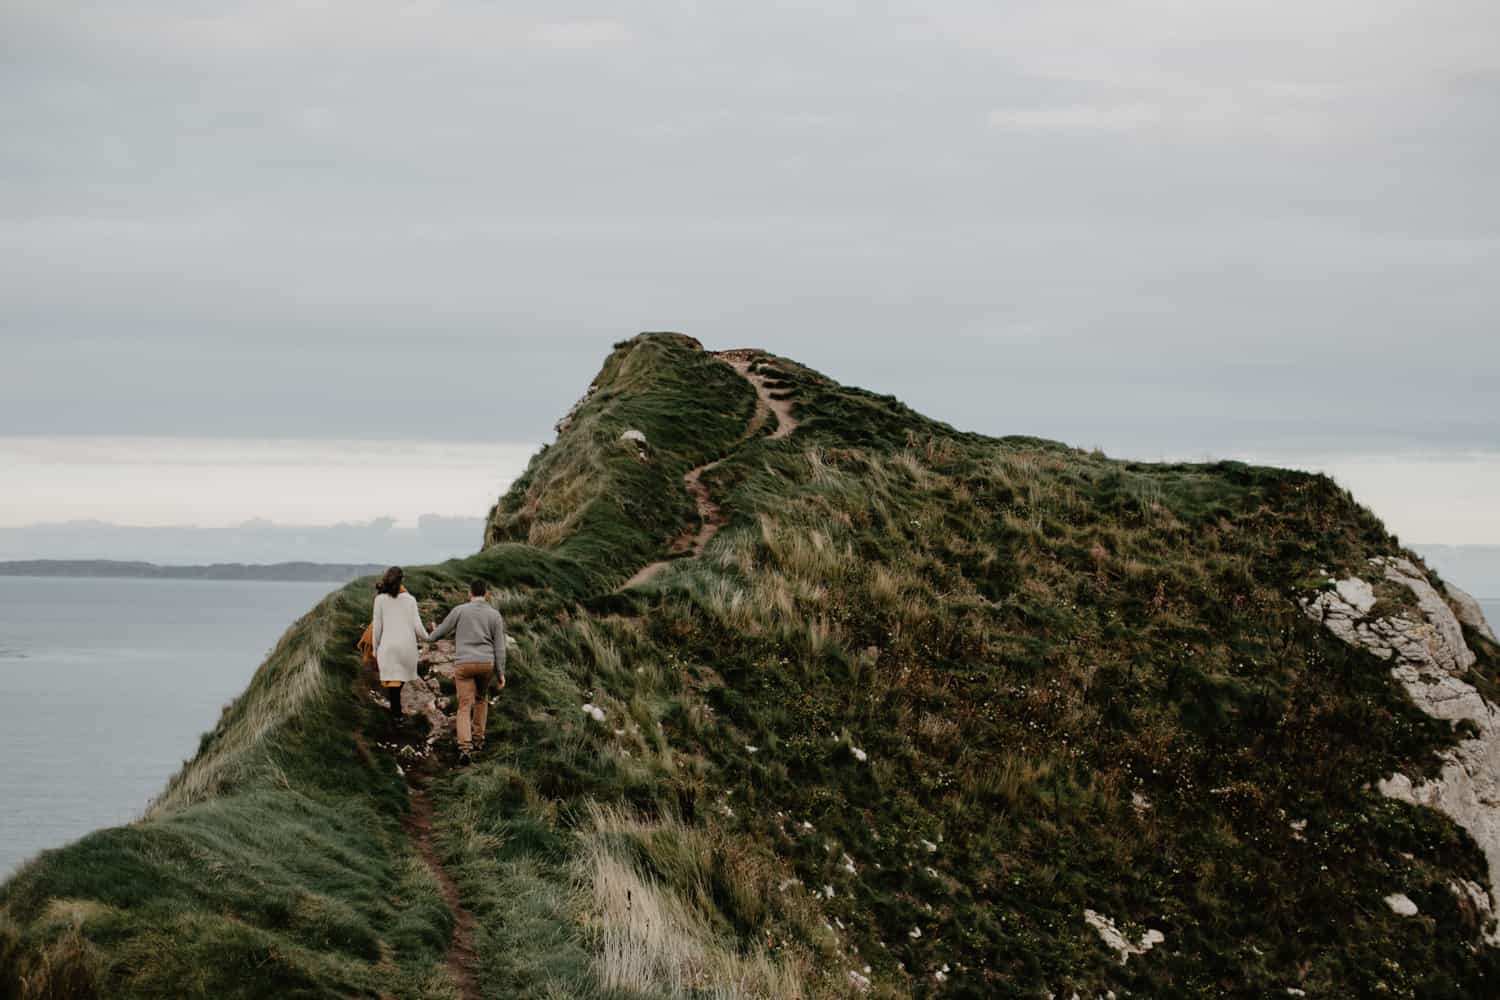 Michele and Dominik - Adventure session // Northern Ireland 